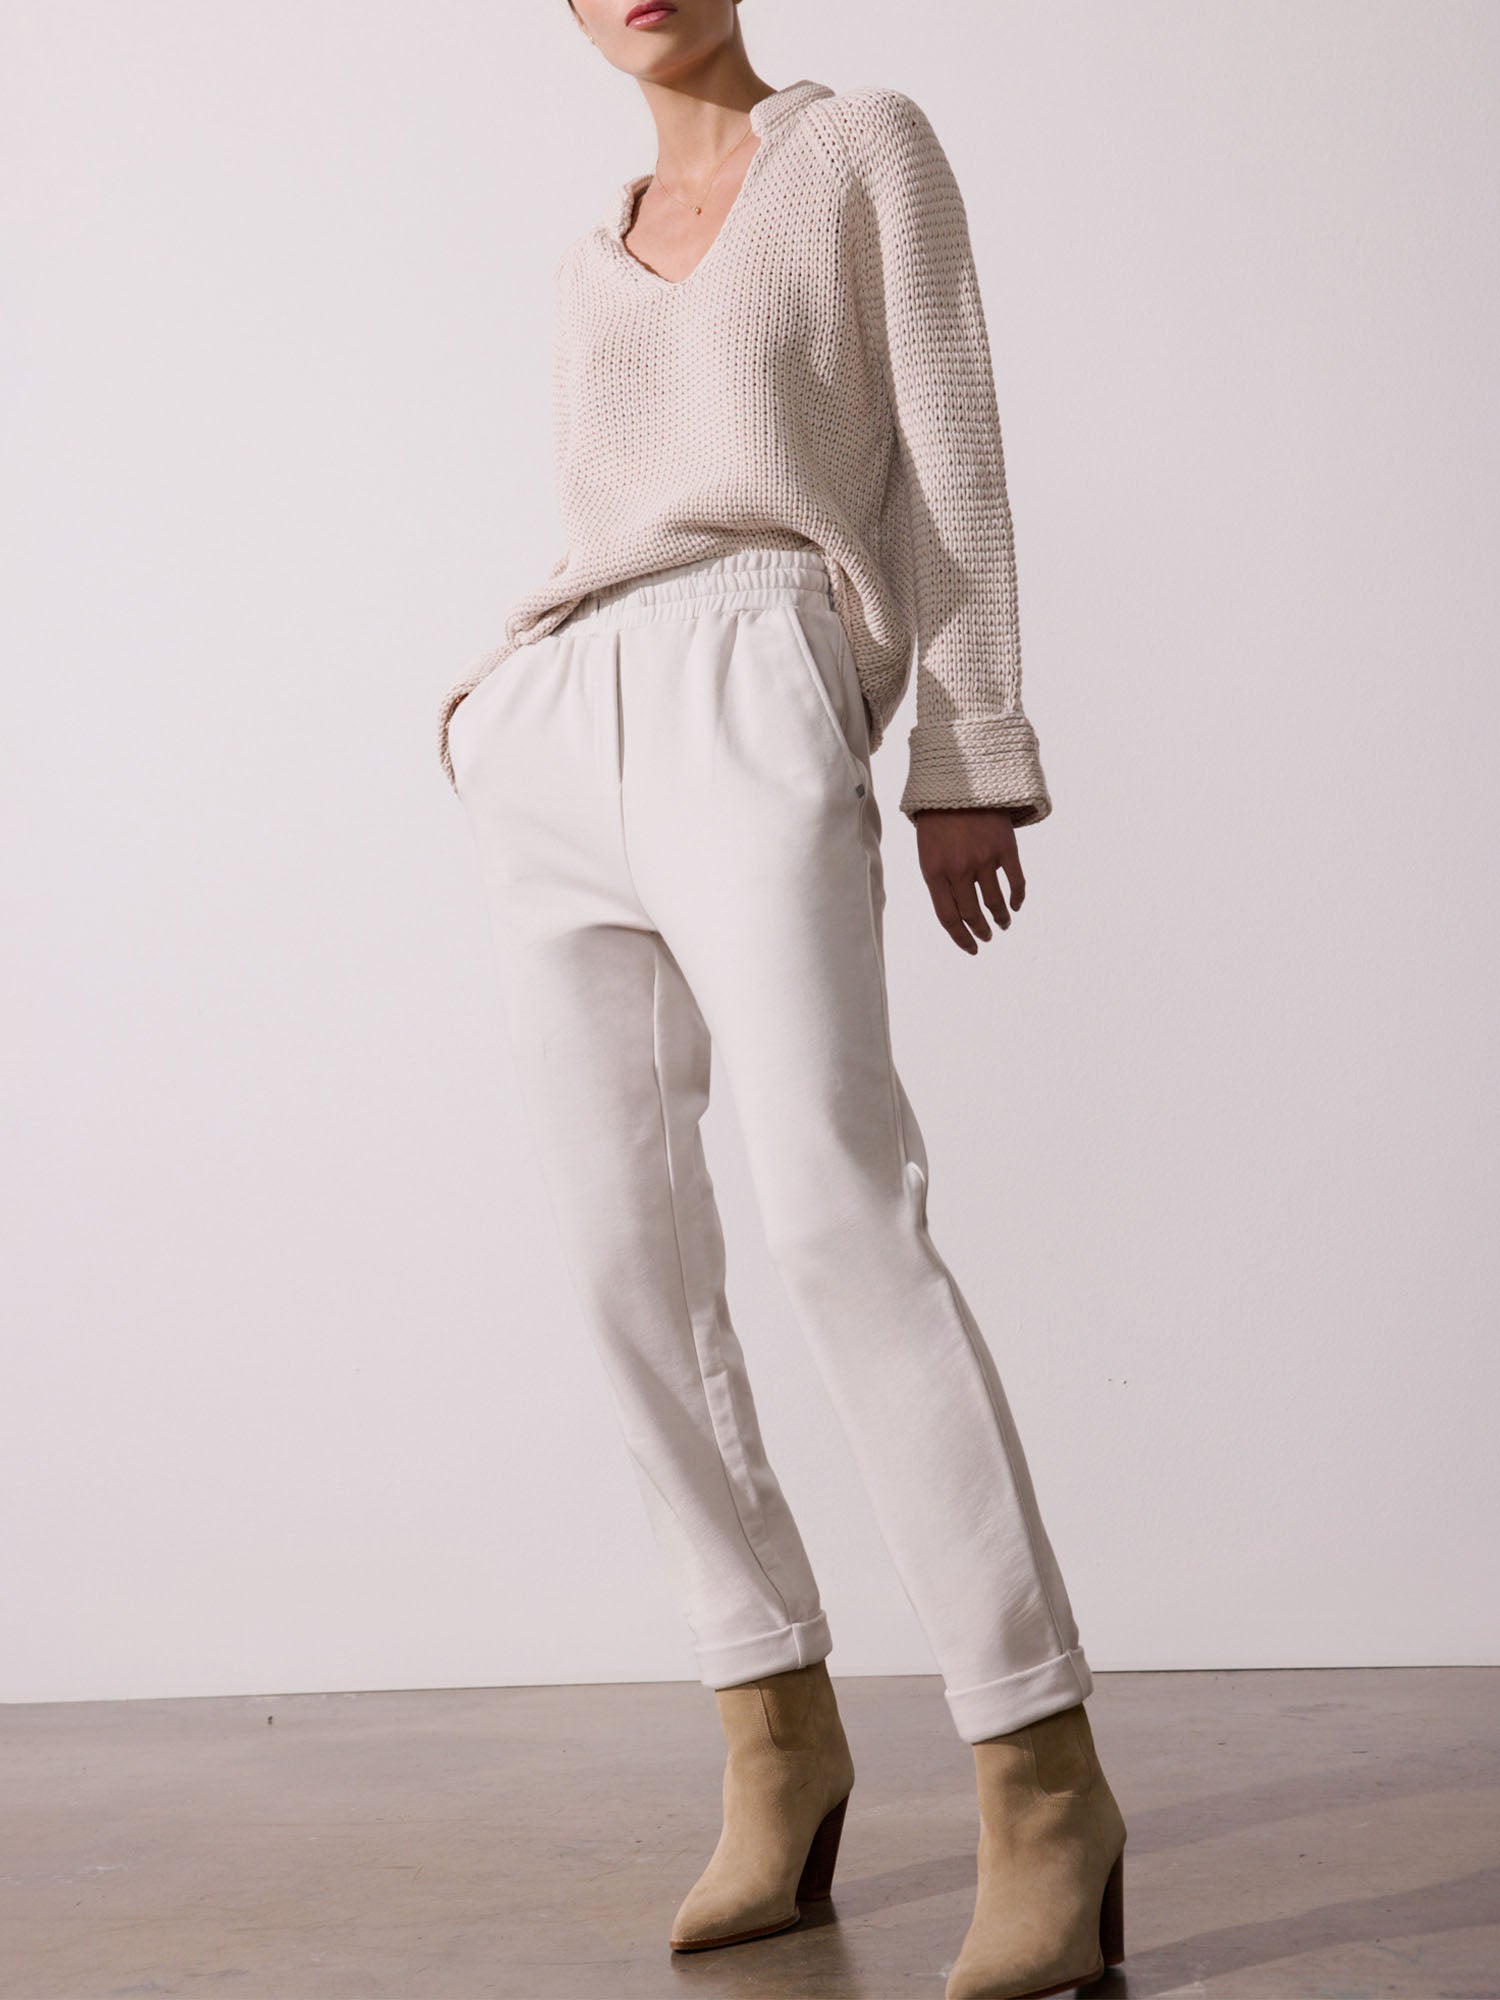 Penn Terry off-white ankle pant full view